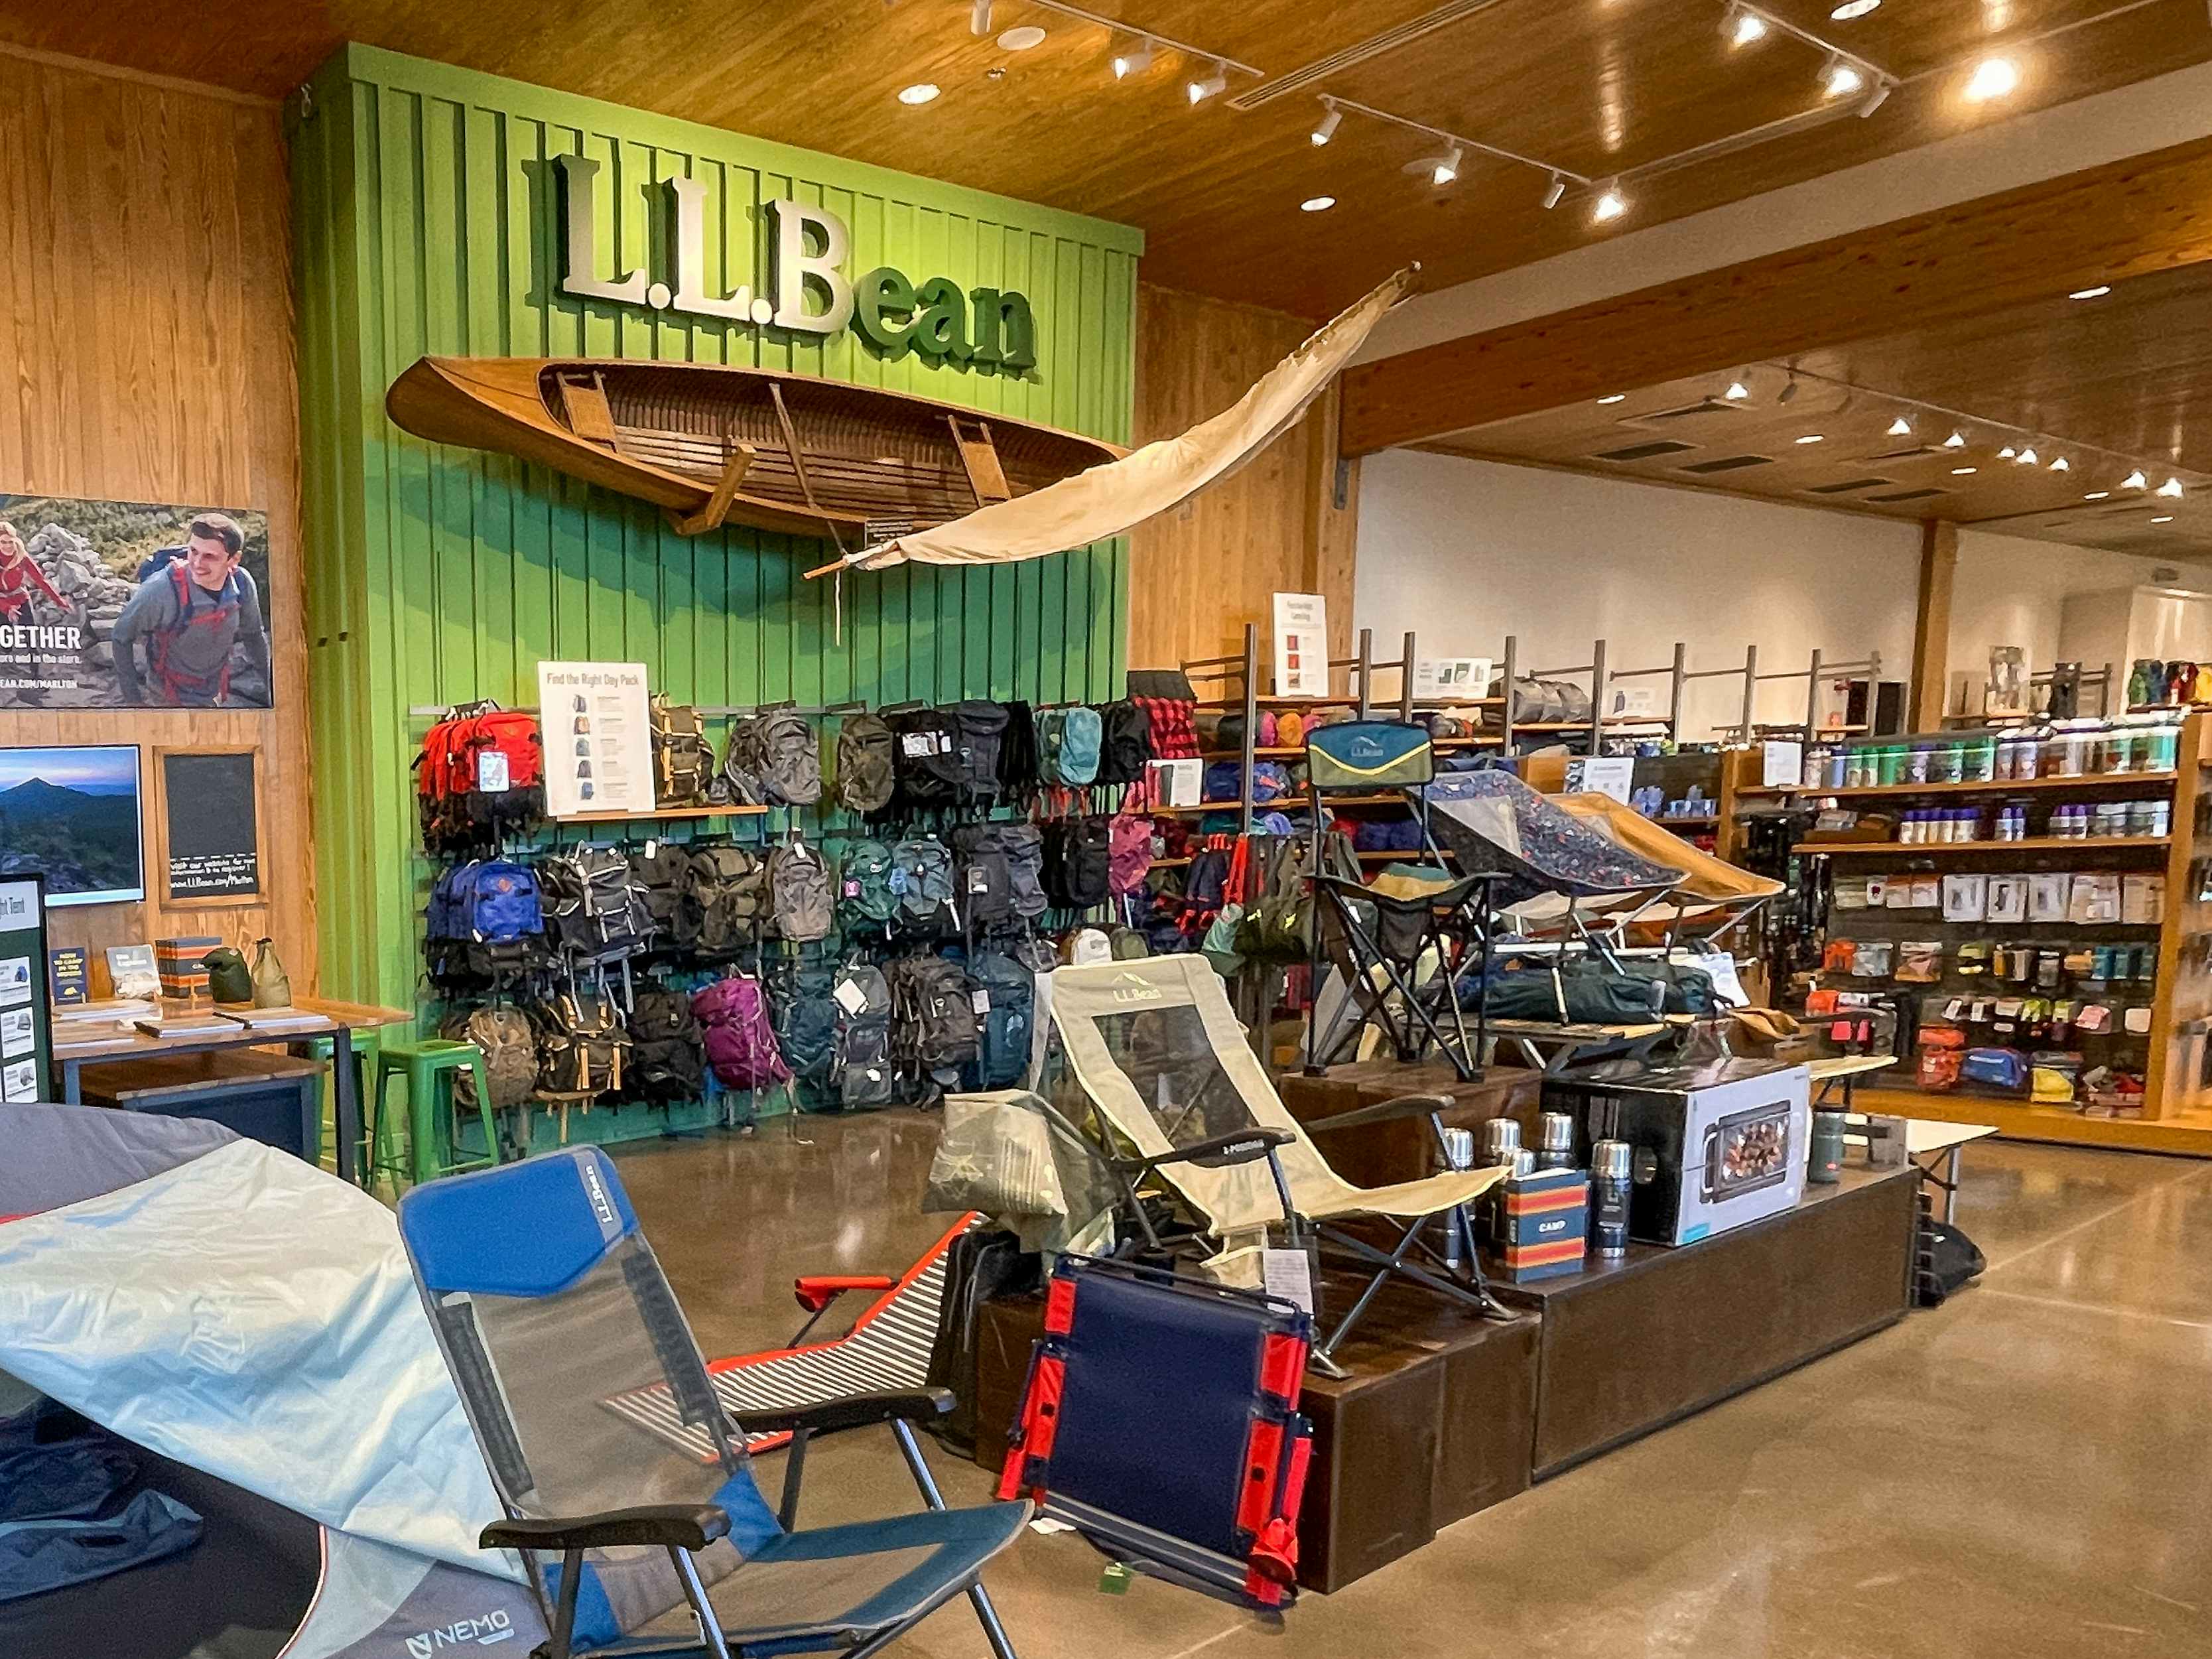 The inside of an L.L.Bean store showing products on display.